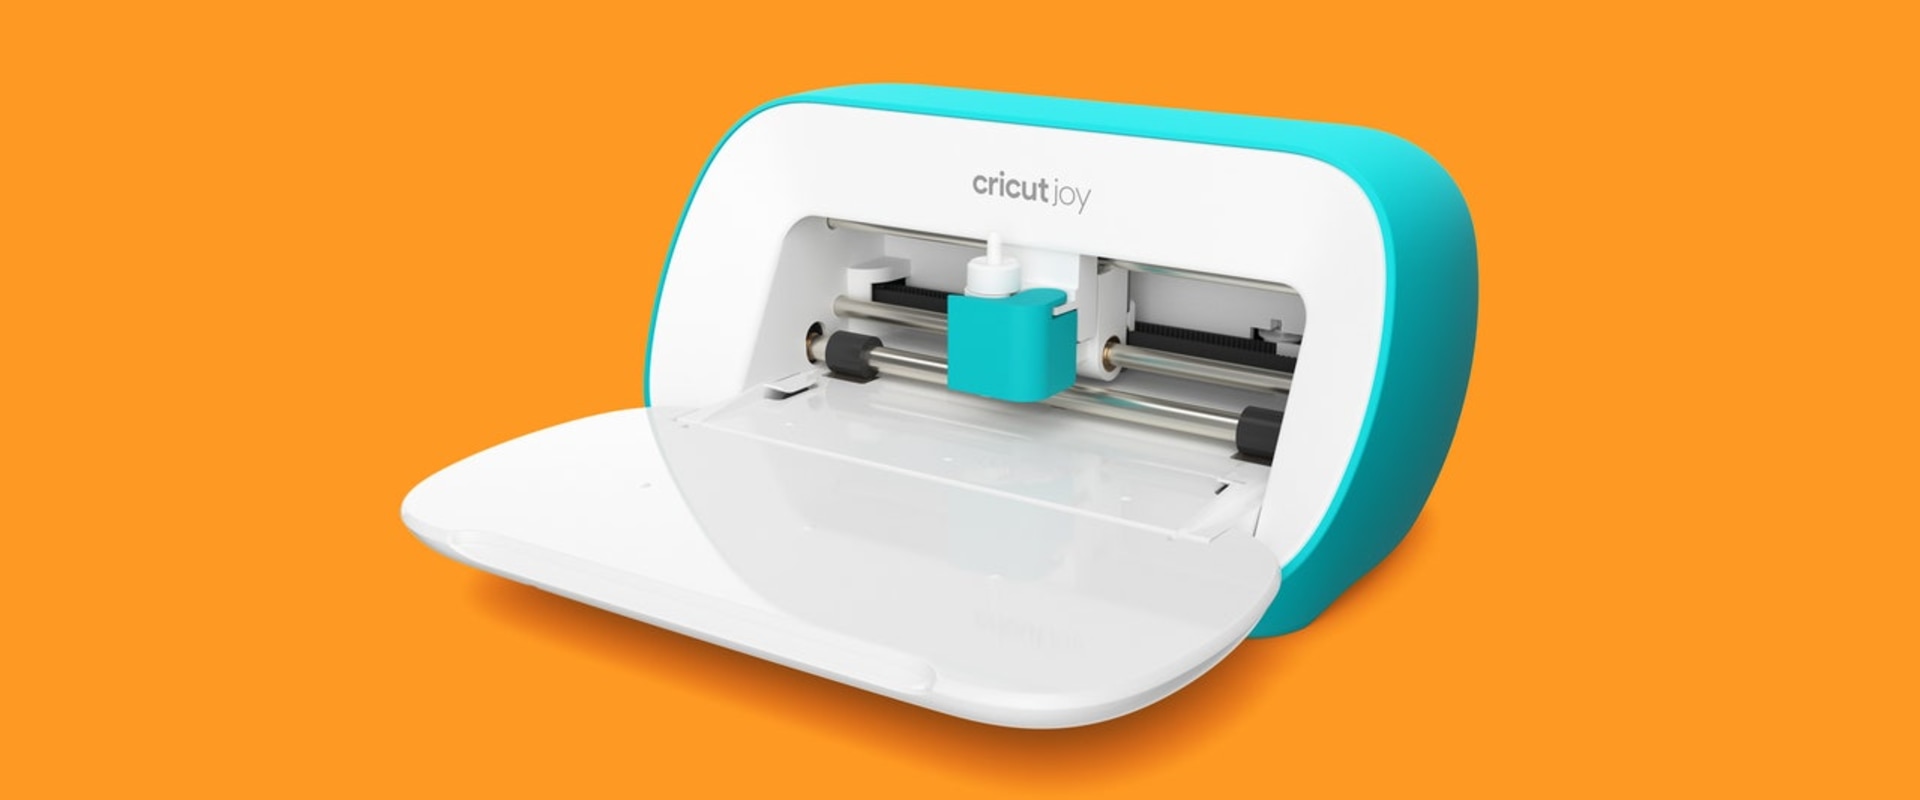 Is a cricut worth it for personal use?